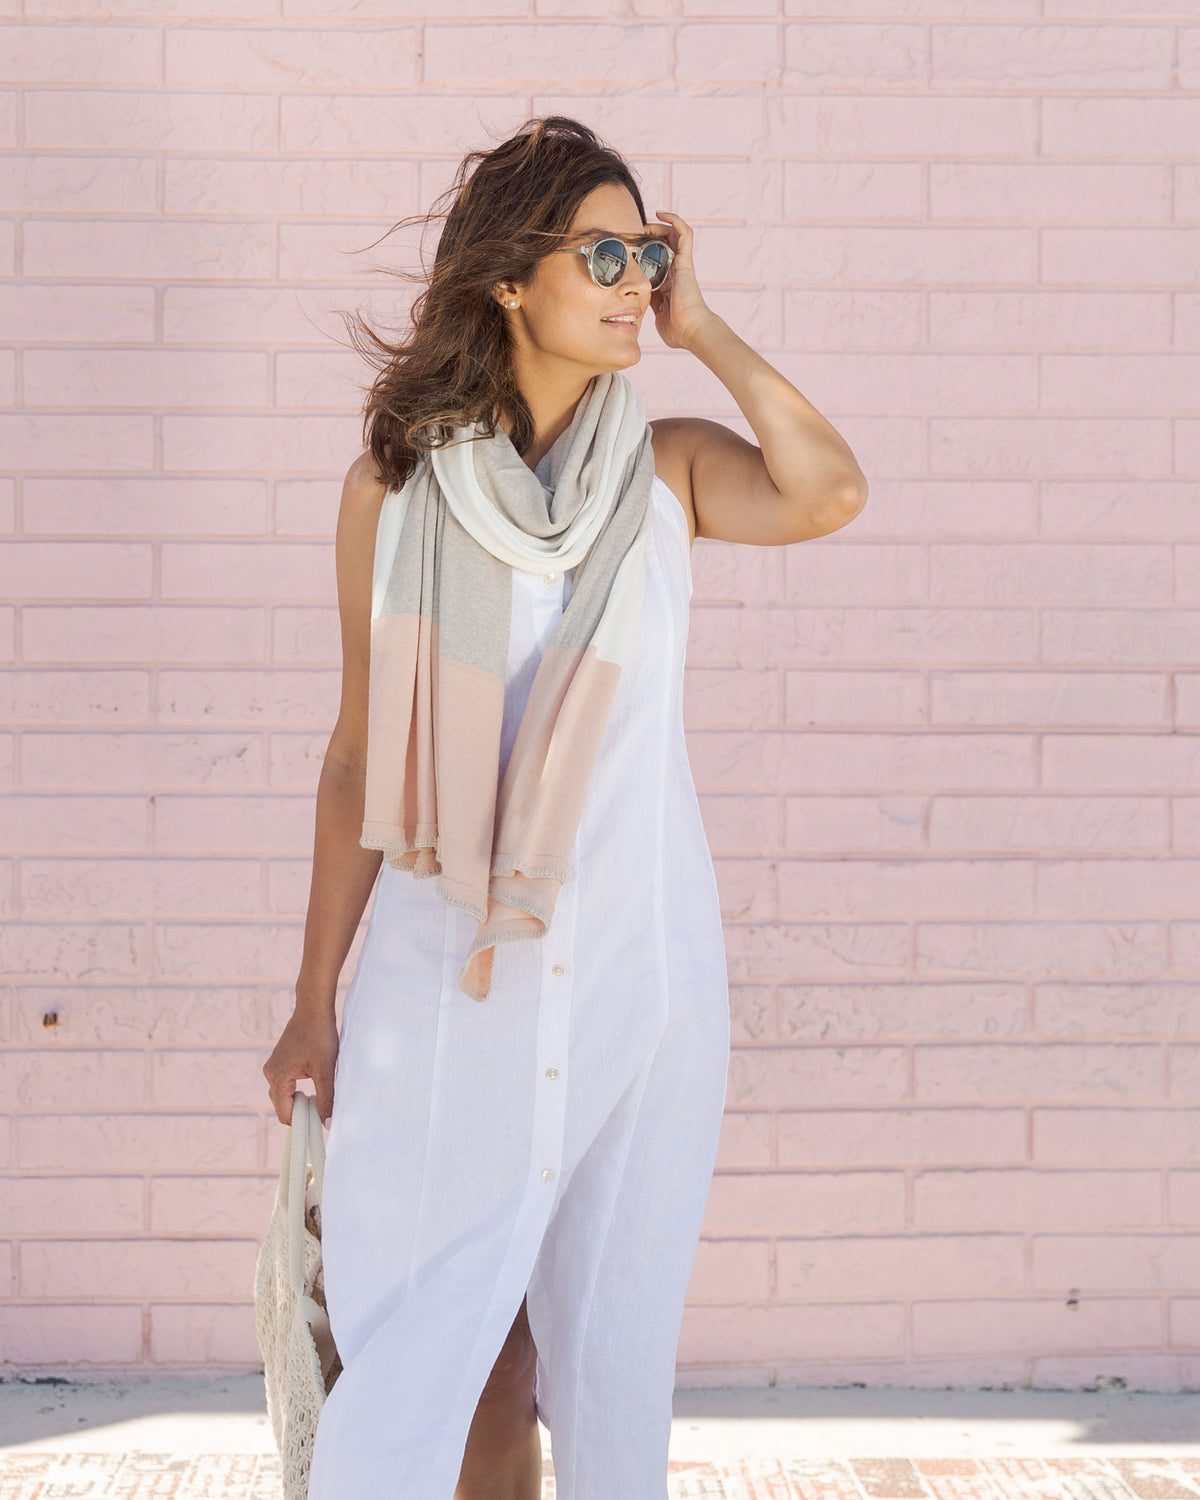 Woman wearing the Dreamsoft Travel Scarf in Blush Colorblock which is a pink, tan and cream scarf,  holding a purse wearing sunglasses with wind blowing her hair